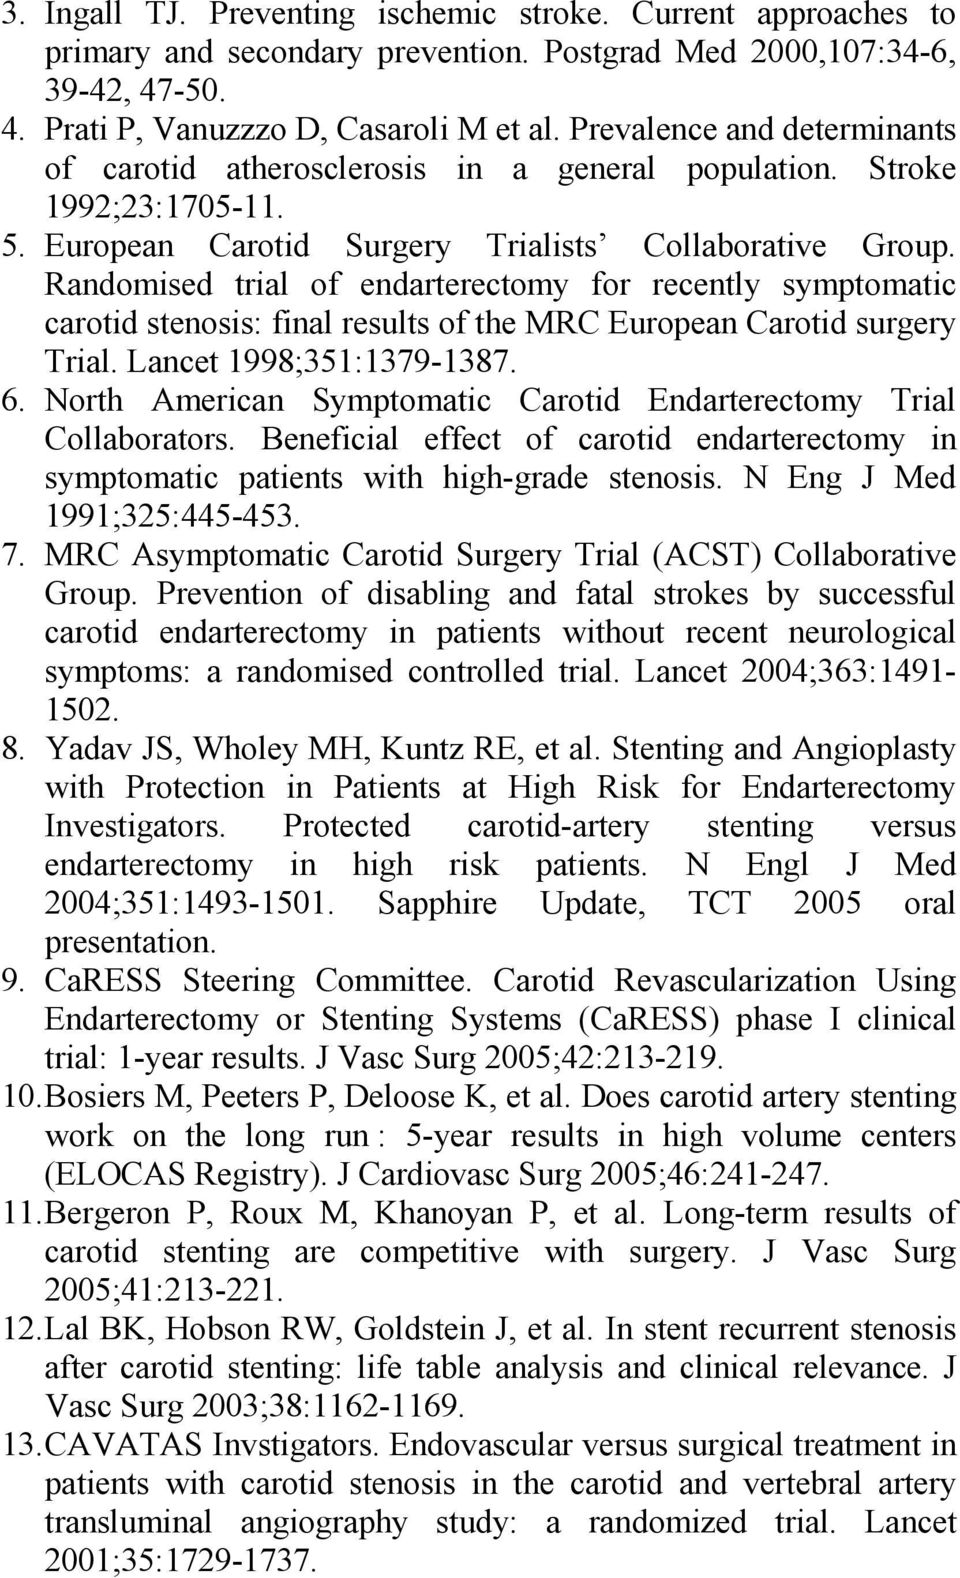 Randomised trial of endarterectomy for recently symptomatic carotid stenosis: final results of the MRC European Carotid surgery Trial. Lancet 1998;351:1379-1387. 6.